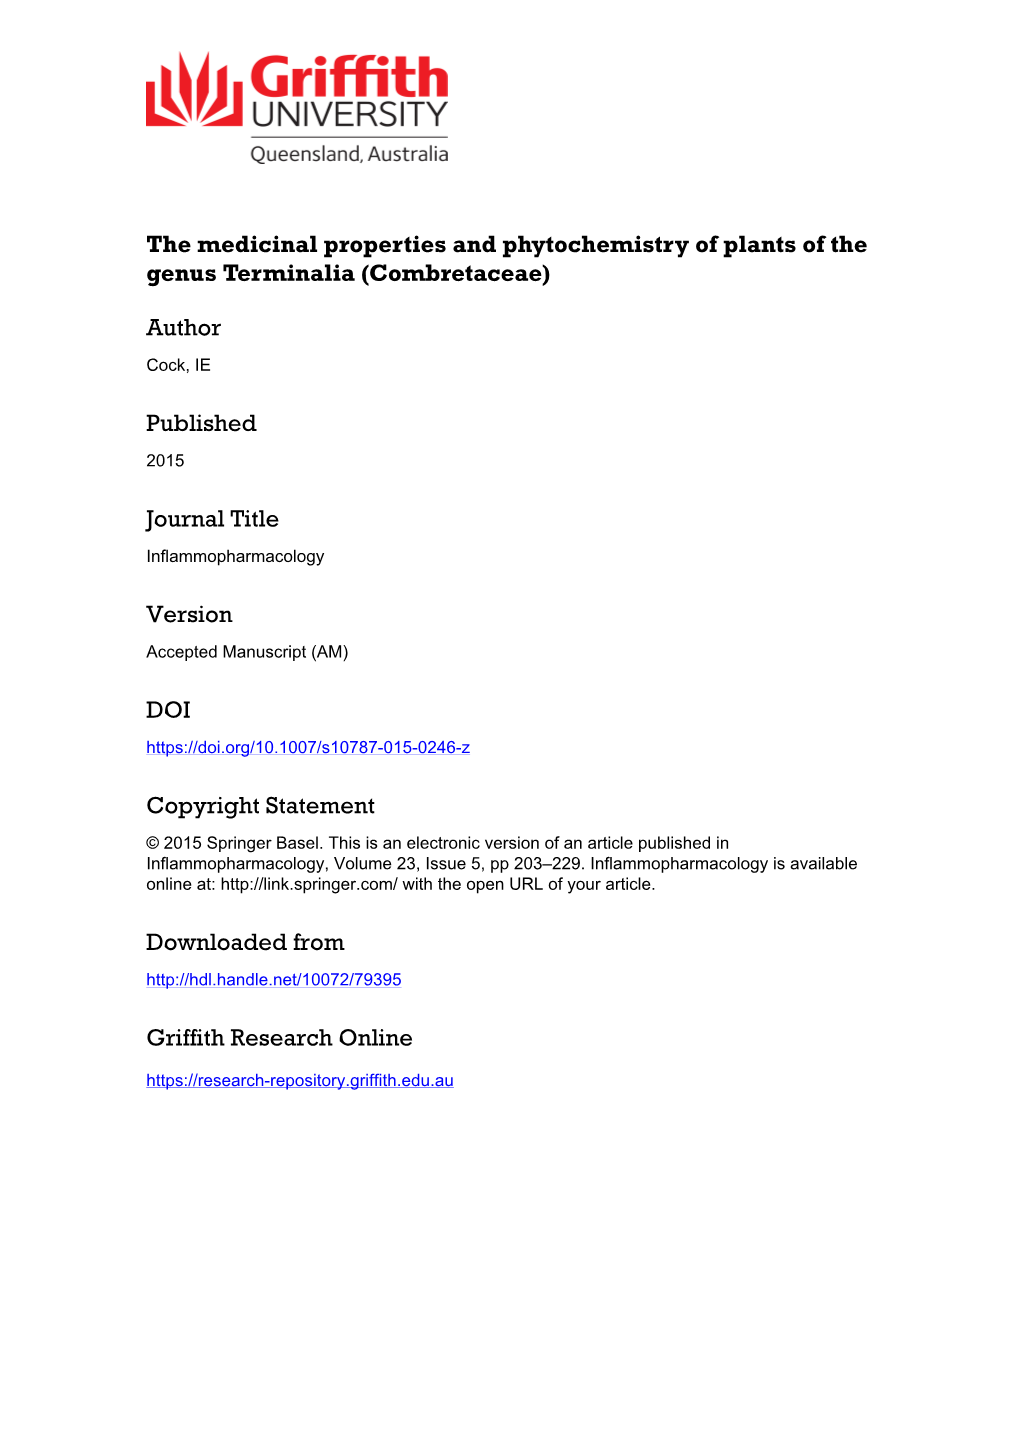 The Medicinal Properties and Phytochemistry of Plants of the Genus Terminalia (Combretaceae)